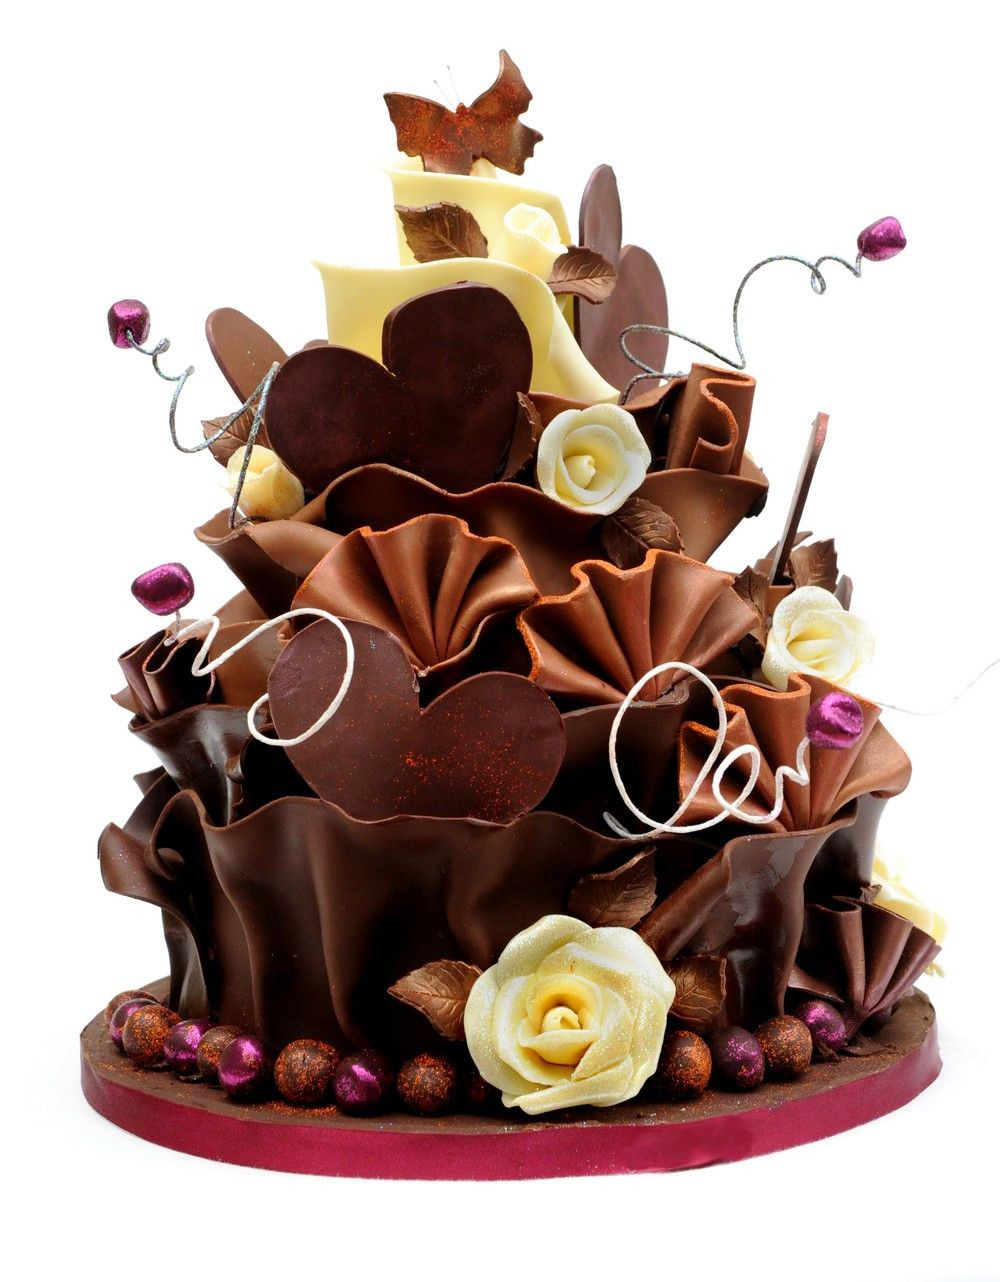 Beautiful Birthday Cakes Images
 Most Beautiful Chocolate Birthday Cakes Ever Most